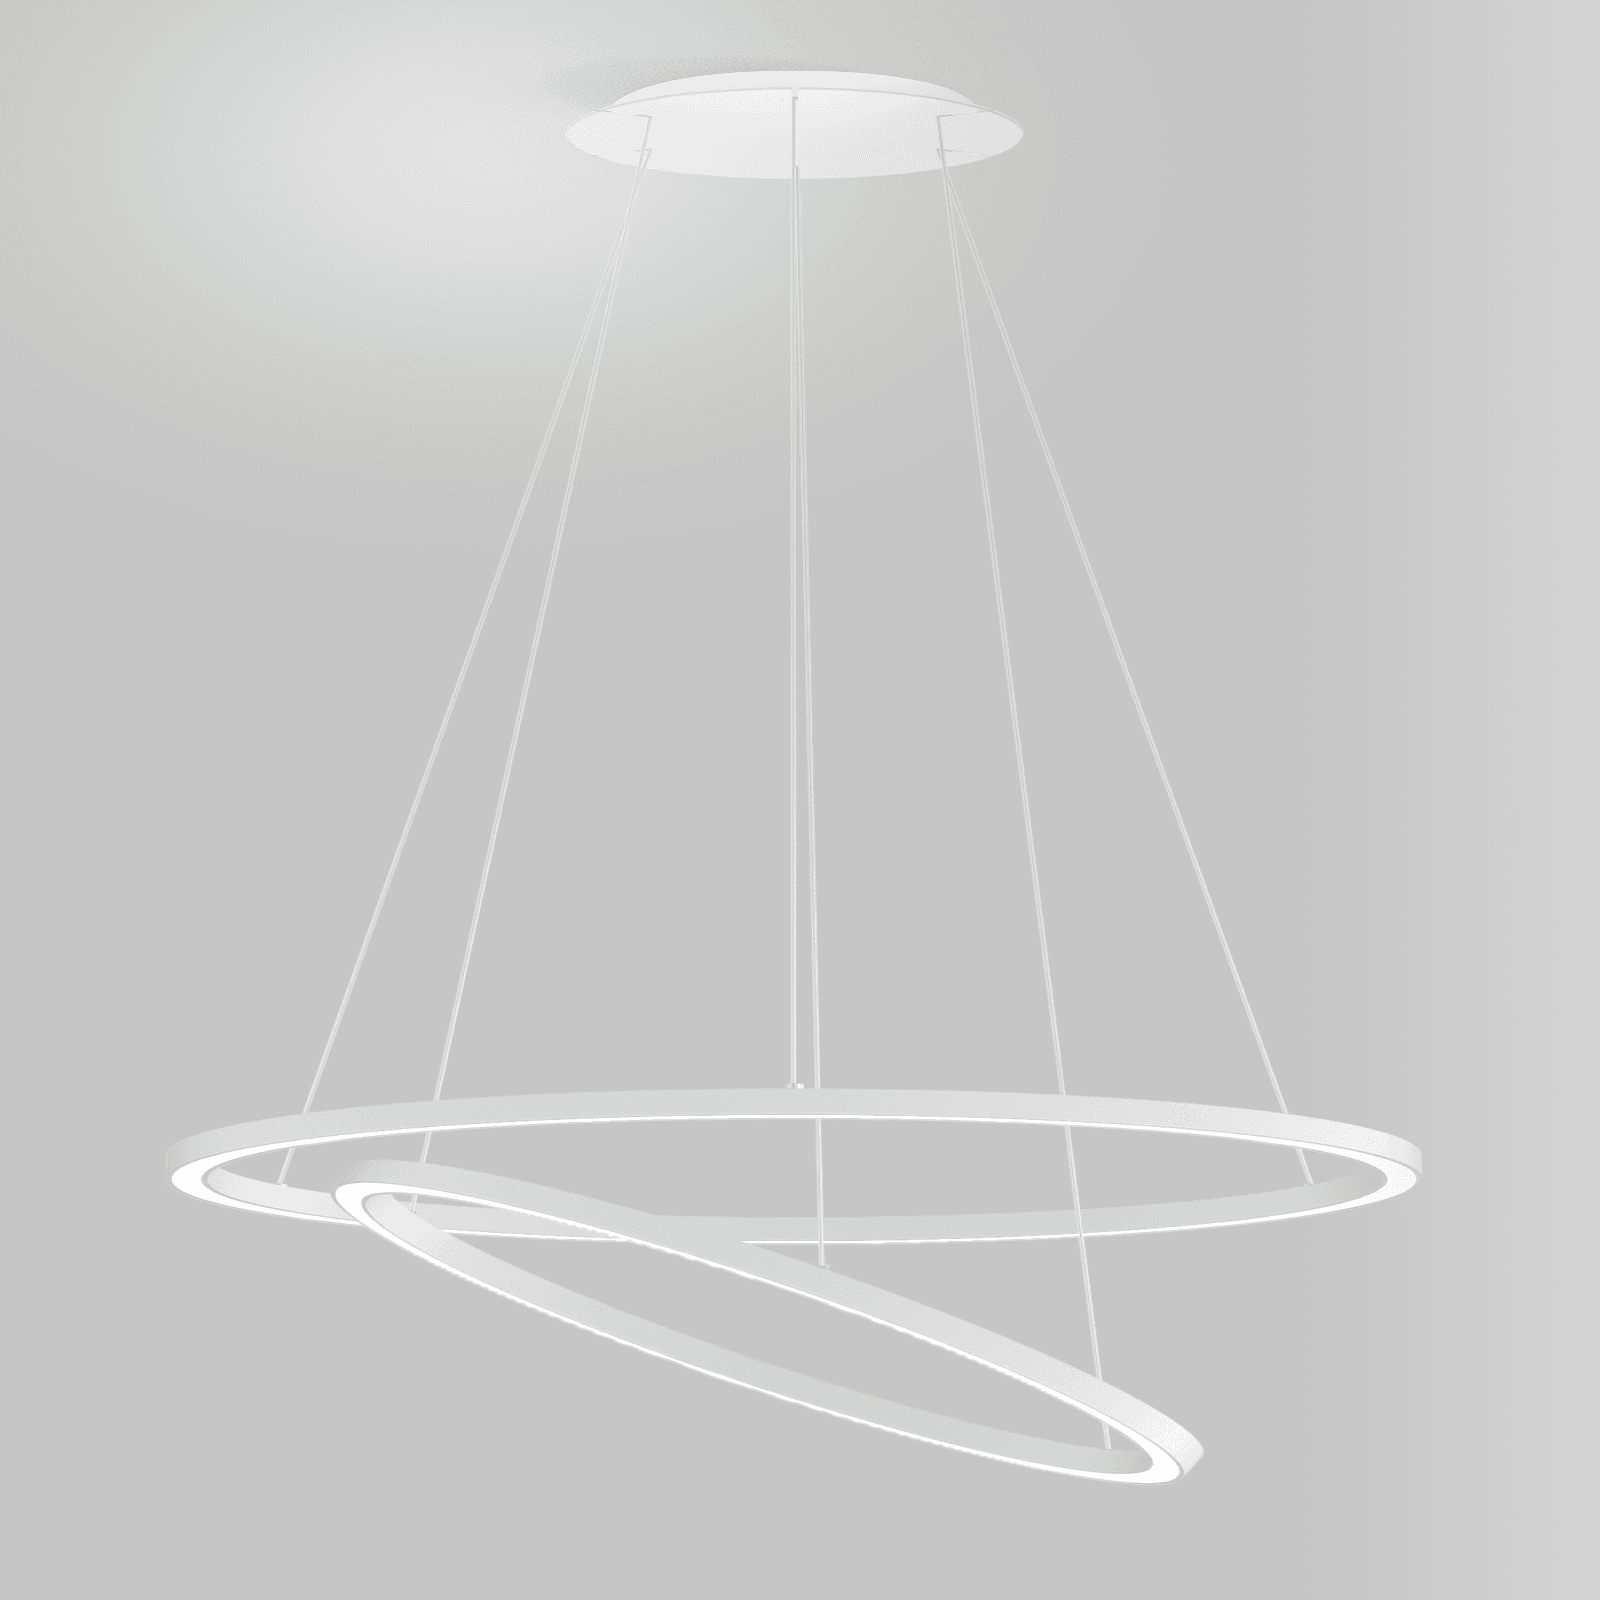 Gallery Product Tour Slim Suspension Light Linealightgroup 1200X1200 1